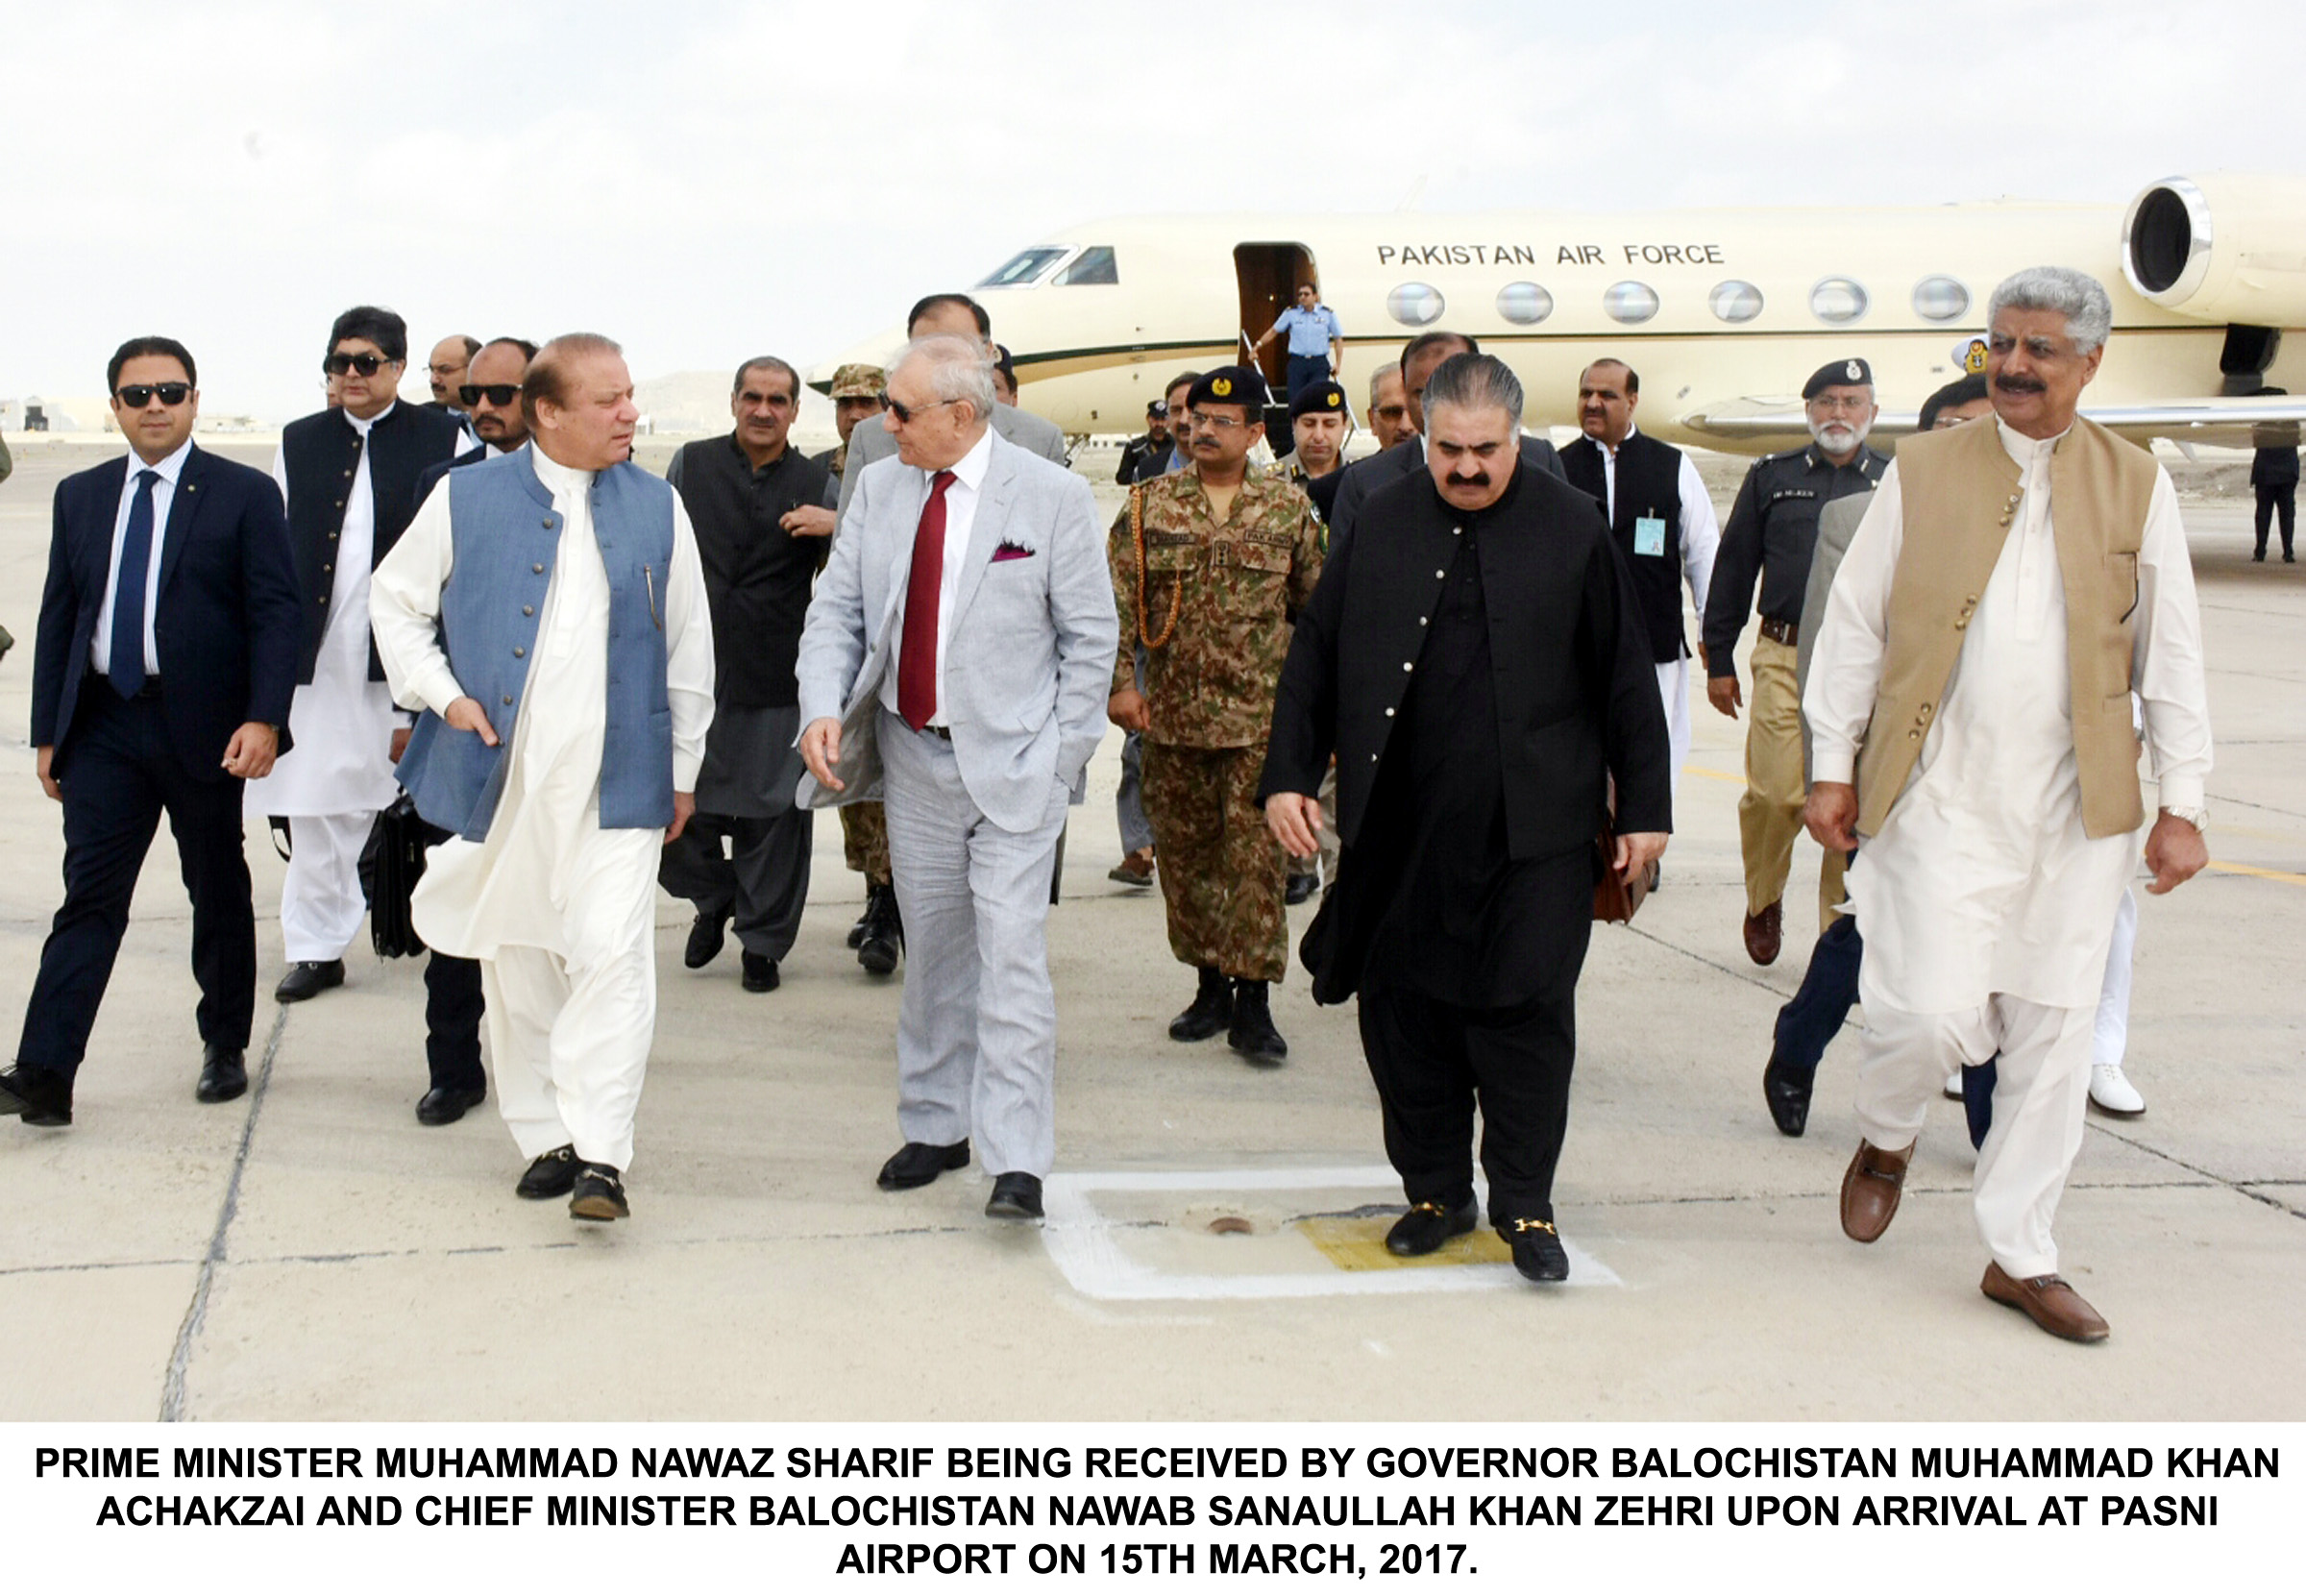 PRIME MINISTER MUHAMMAD NAWAZ SHARIF BEING RECEIVED BY GOVERNOR BALOCHISTAN MUHAMMAD KHAN ACHAKZAI AND CHIEF MINISTER BALOCHISTAN NAWAB SANAULLAH KHAN ZEHRI UPON ARRIVAL AT PASNI AIRPORT ON 15TH MARCH, 2017.